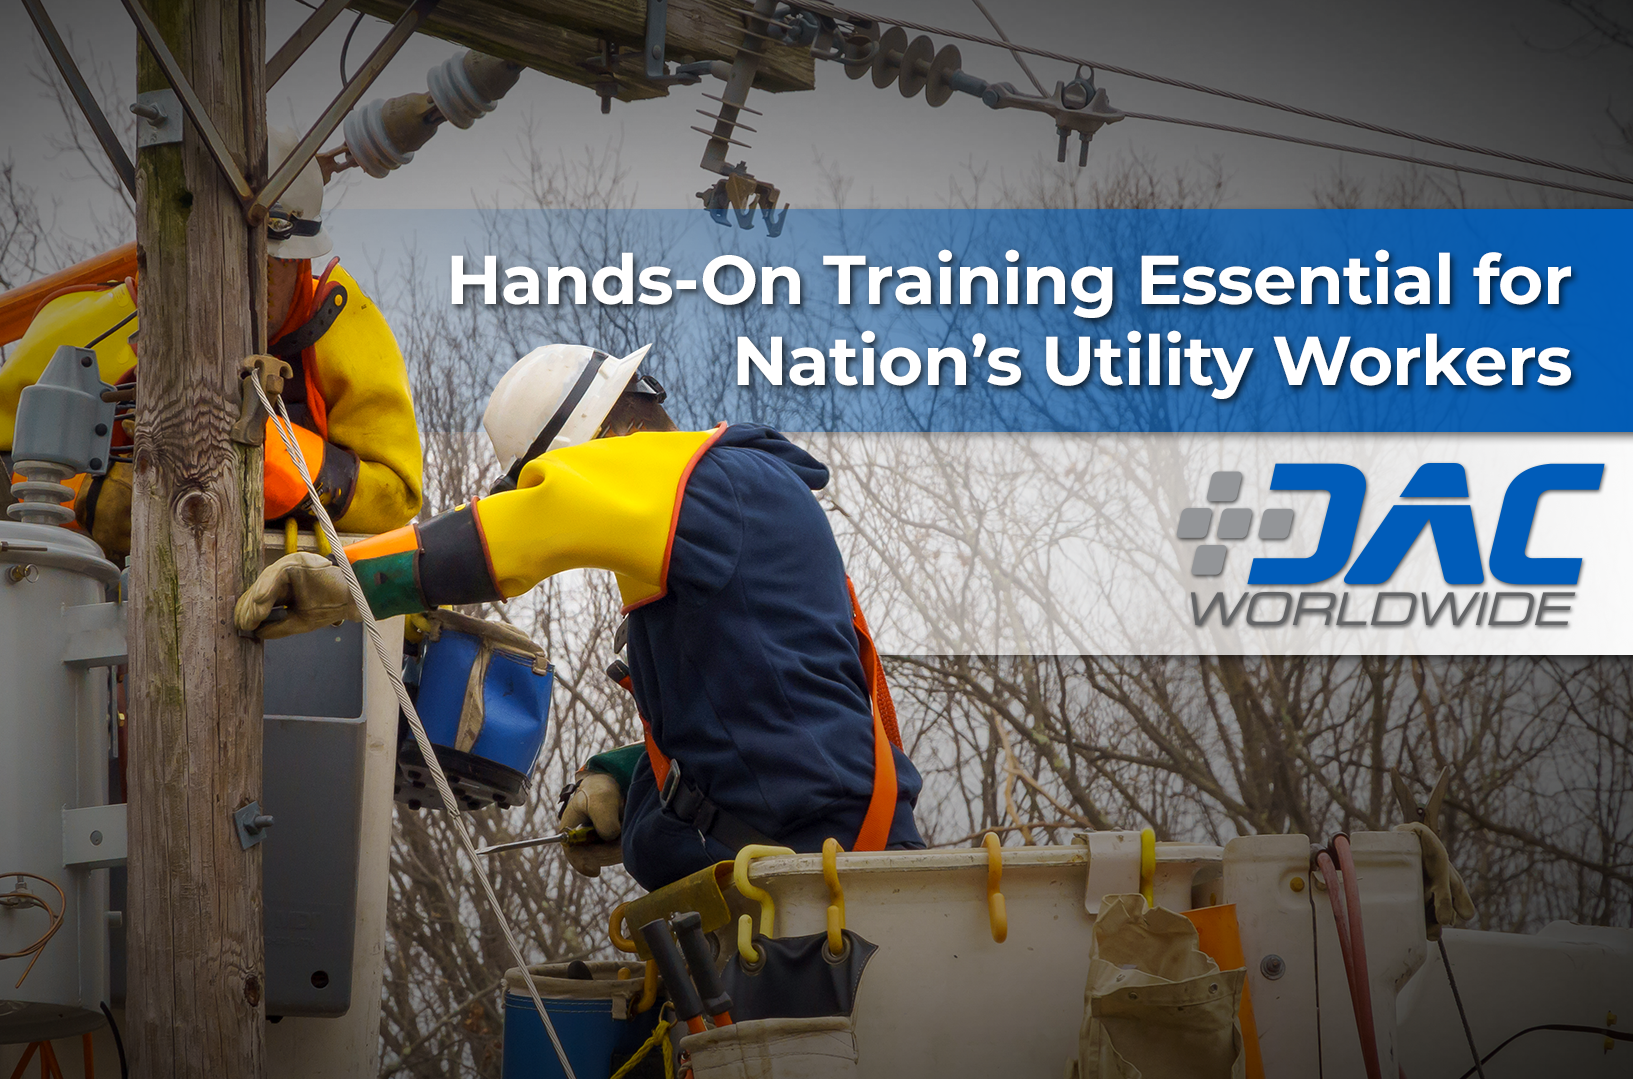 Hands-On Training Essential for Nation’s Utility Workers